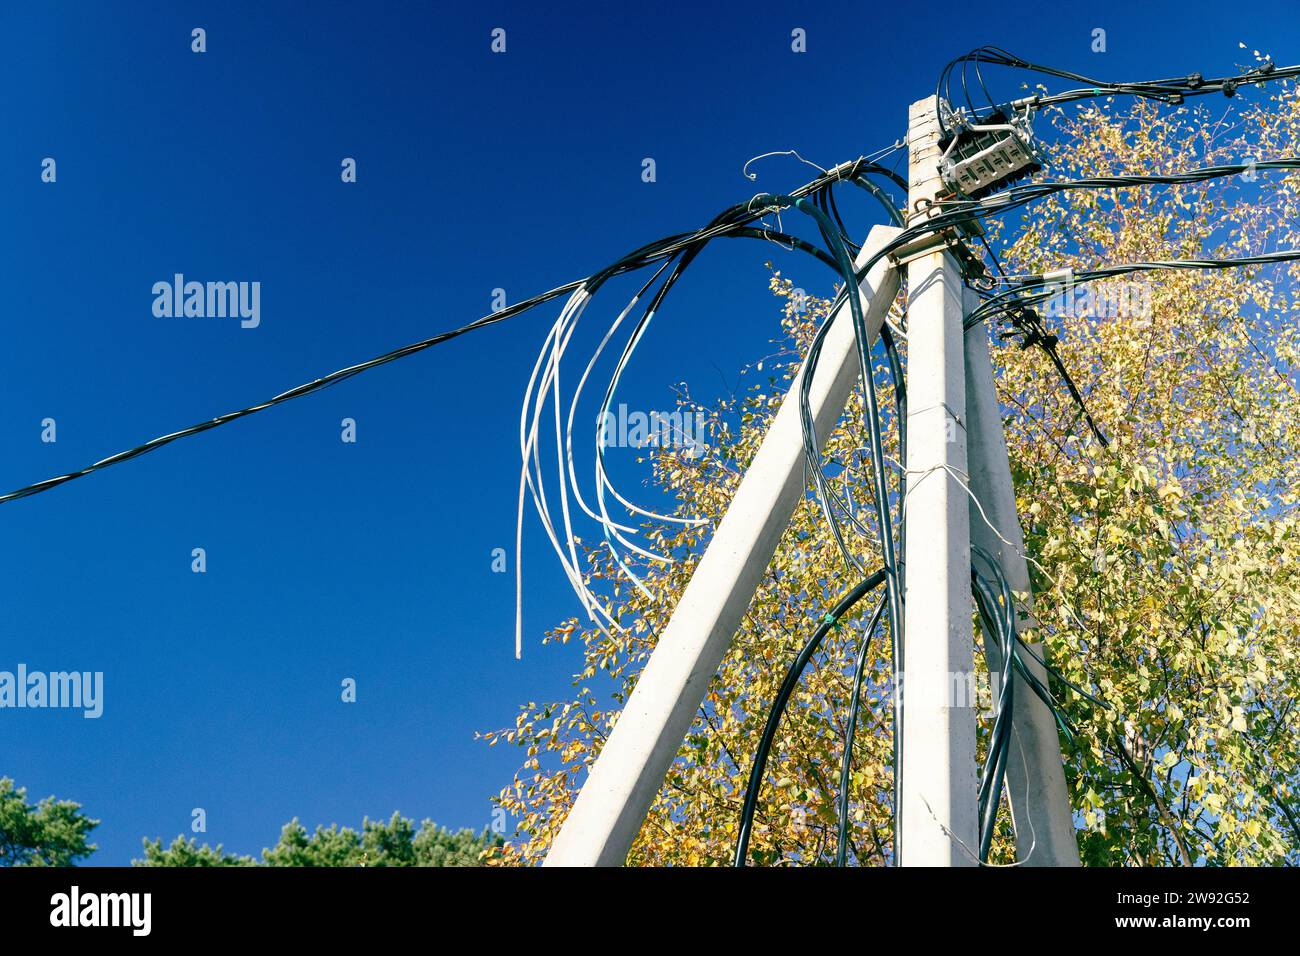 concrete pillar with numerous electrical wires and connectors, serving as an essential component of urban infrastructure and enabling power supply acr Stock Photo